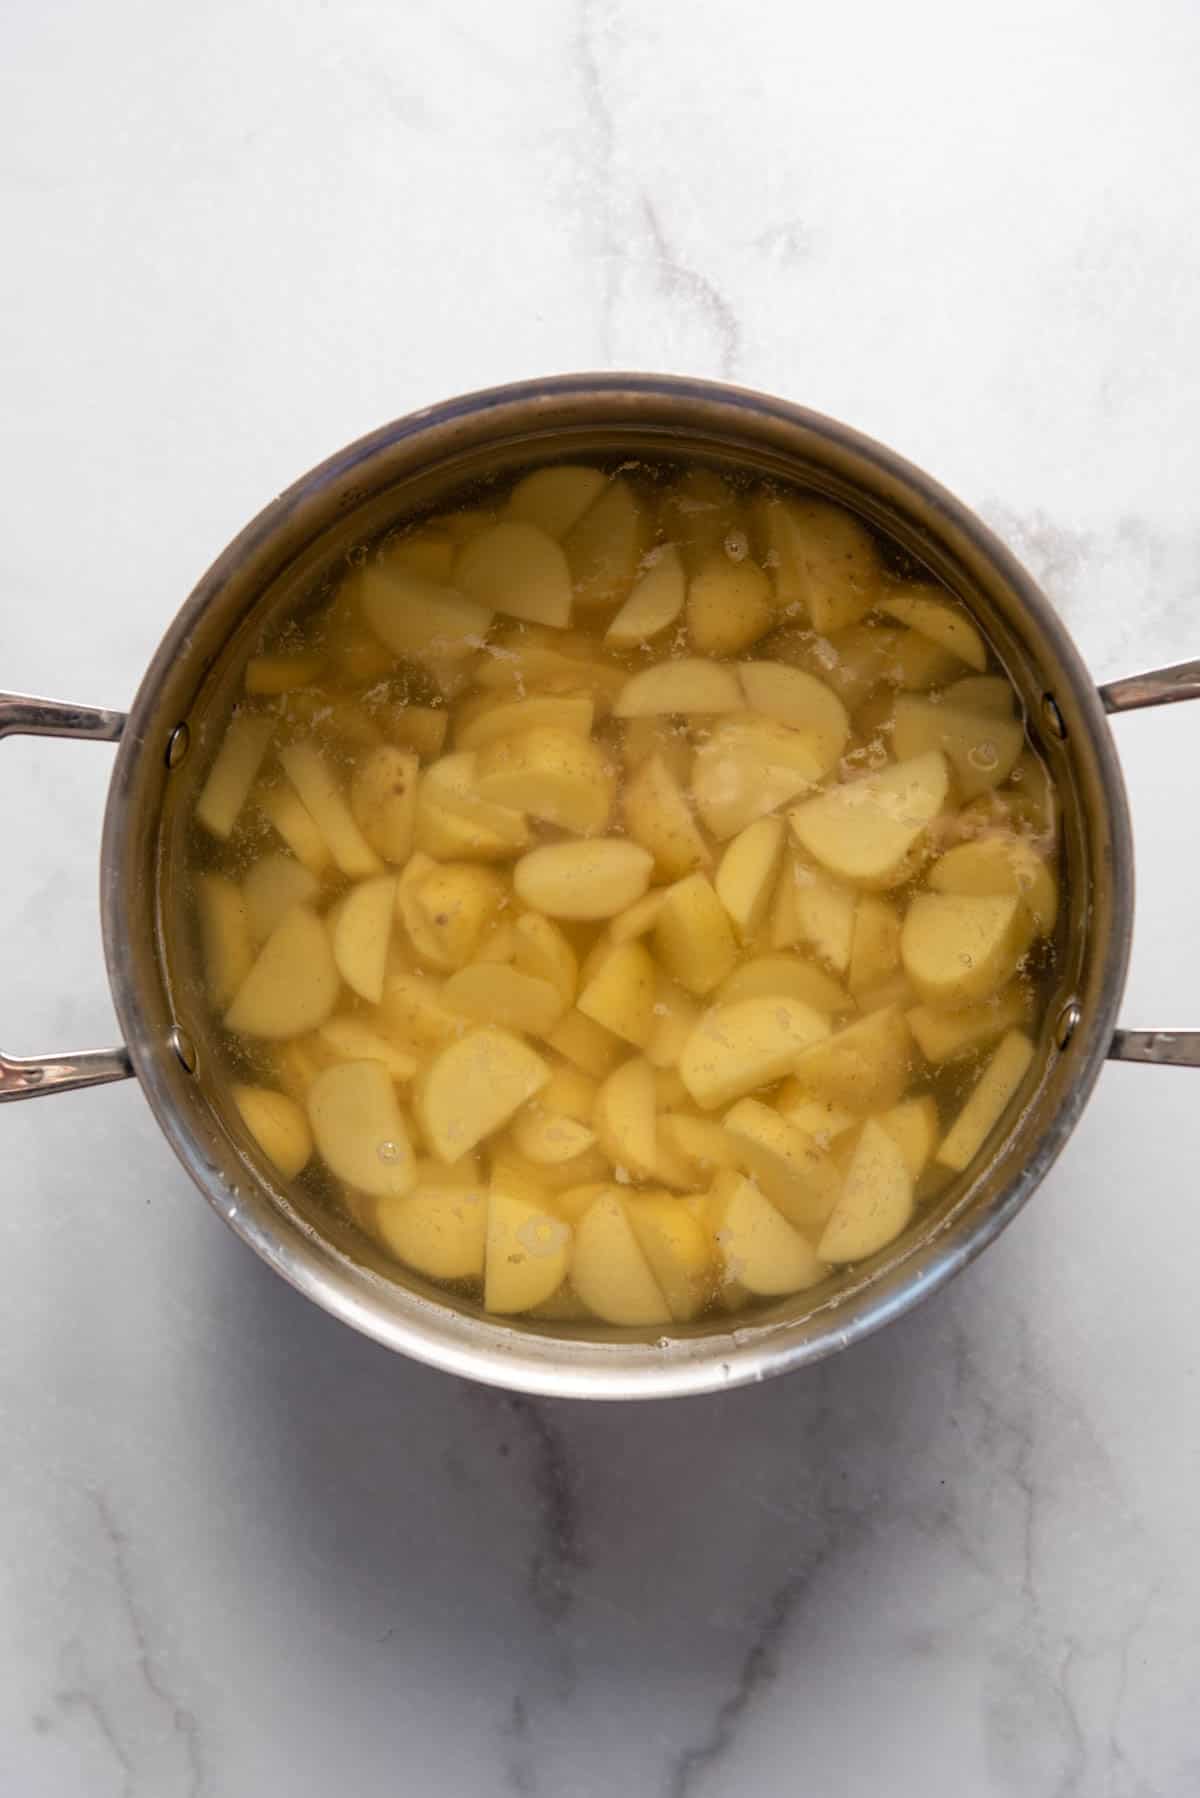 Cooking Yukon gold potatoes in a large pot of water.